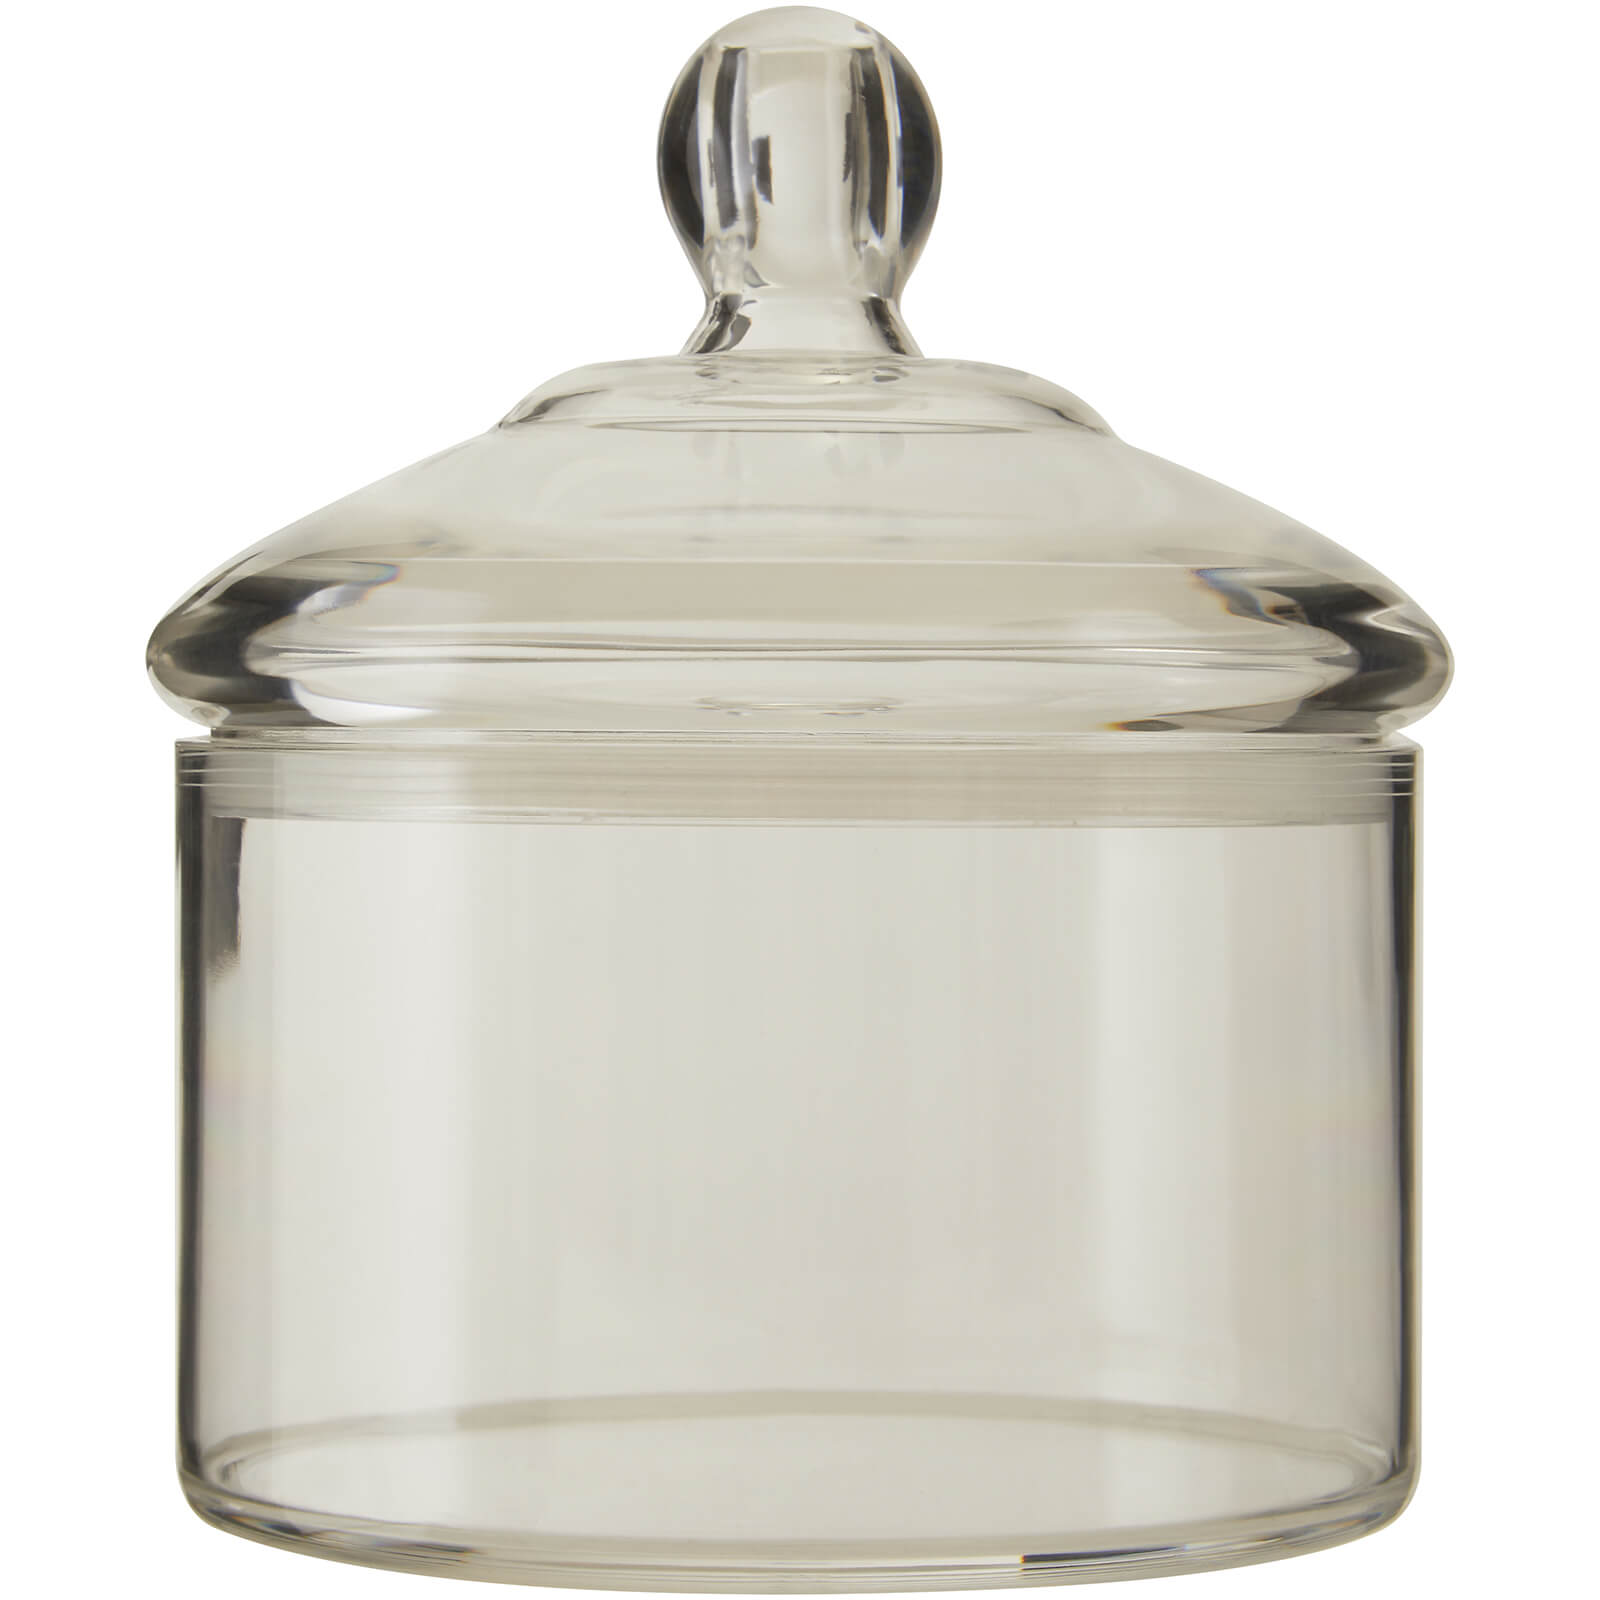 Image of Gozo Round Canister with Lid - Medium